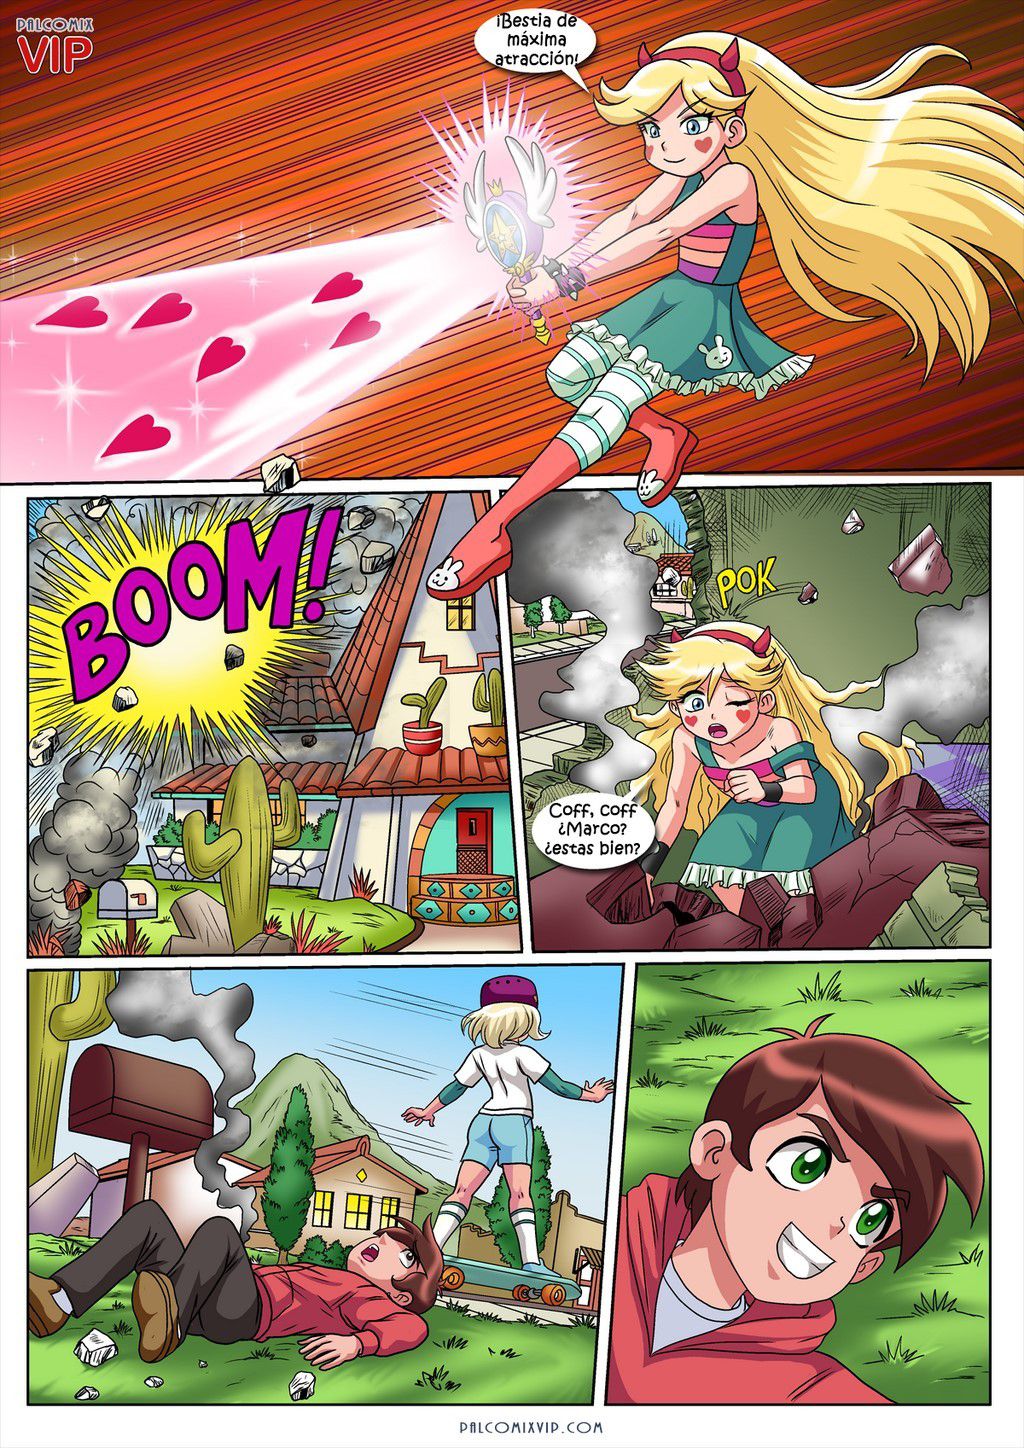 [Palcomix] Amante Latino (Star vs. the Forces of Evil) [Spanish] 3